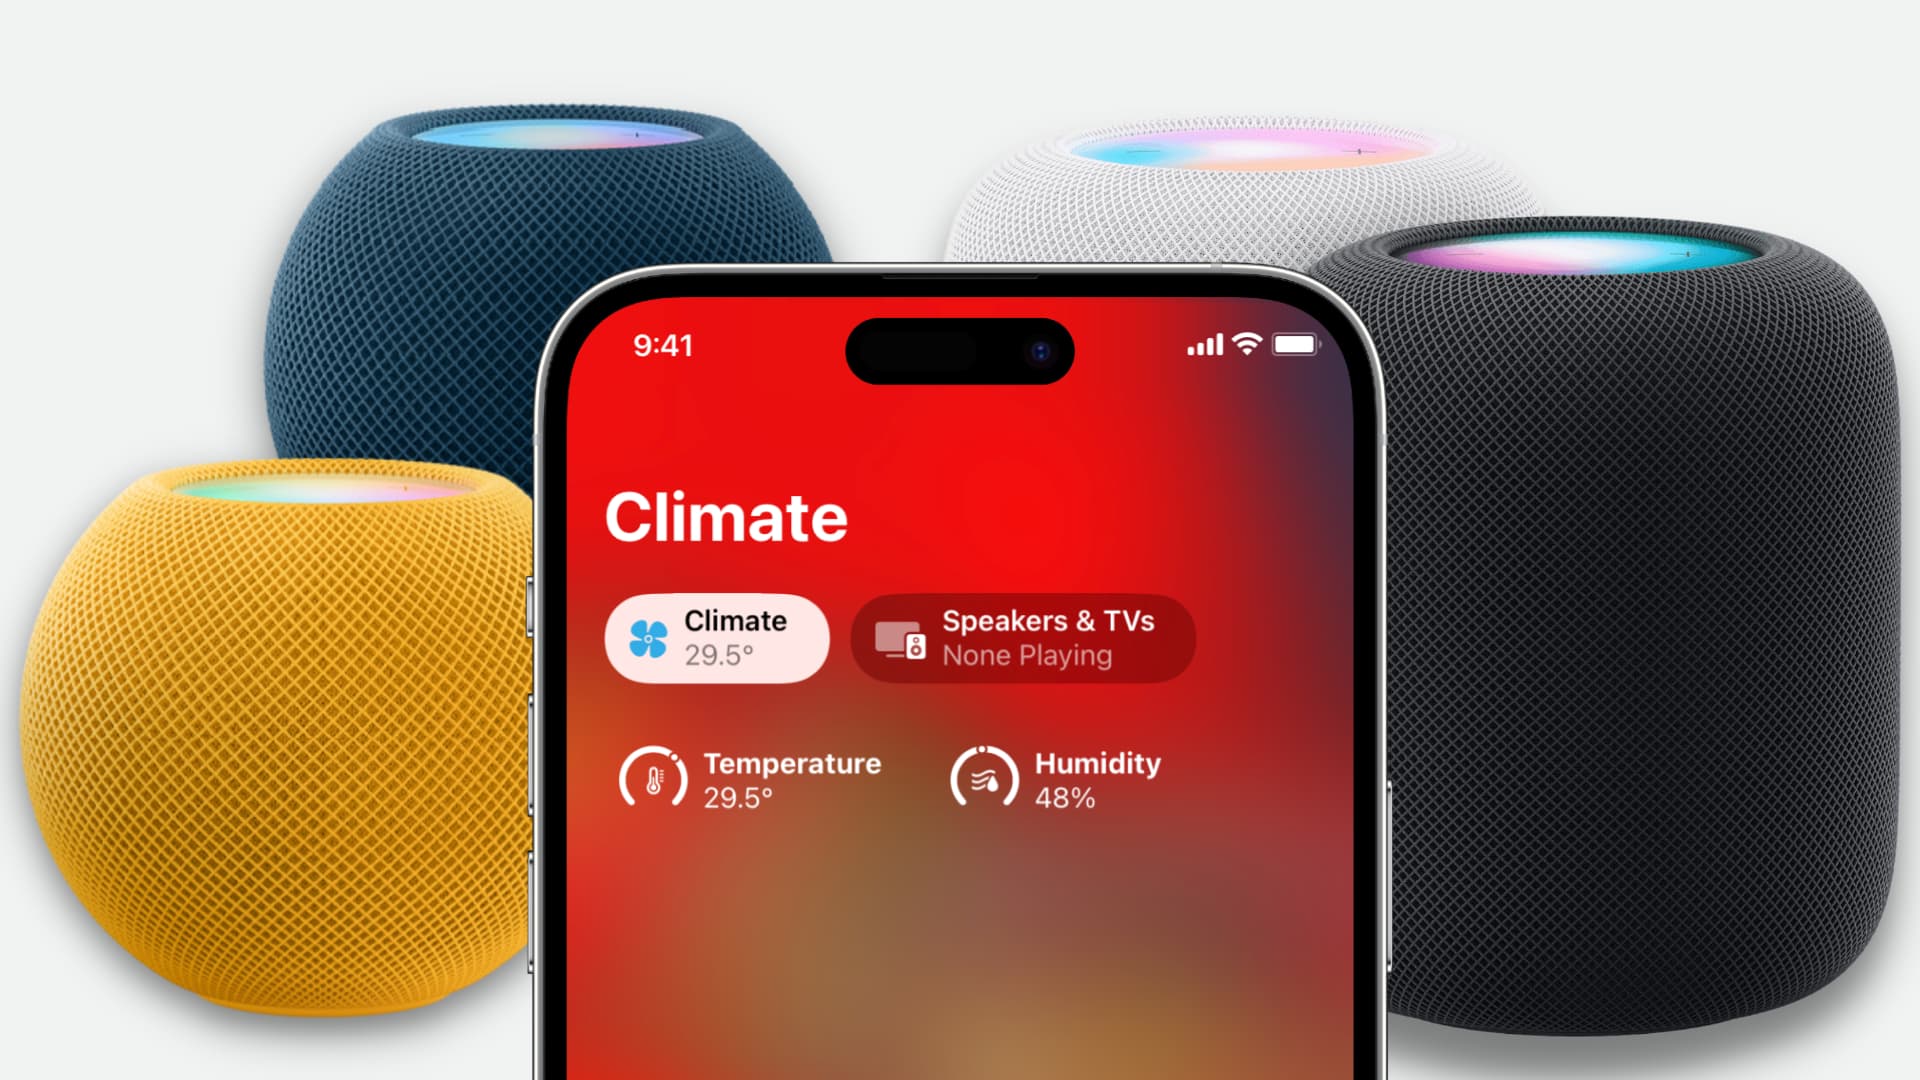 How to get the temperature and humidity level of a room using your HomePod